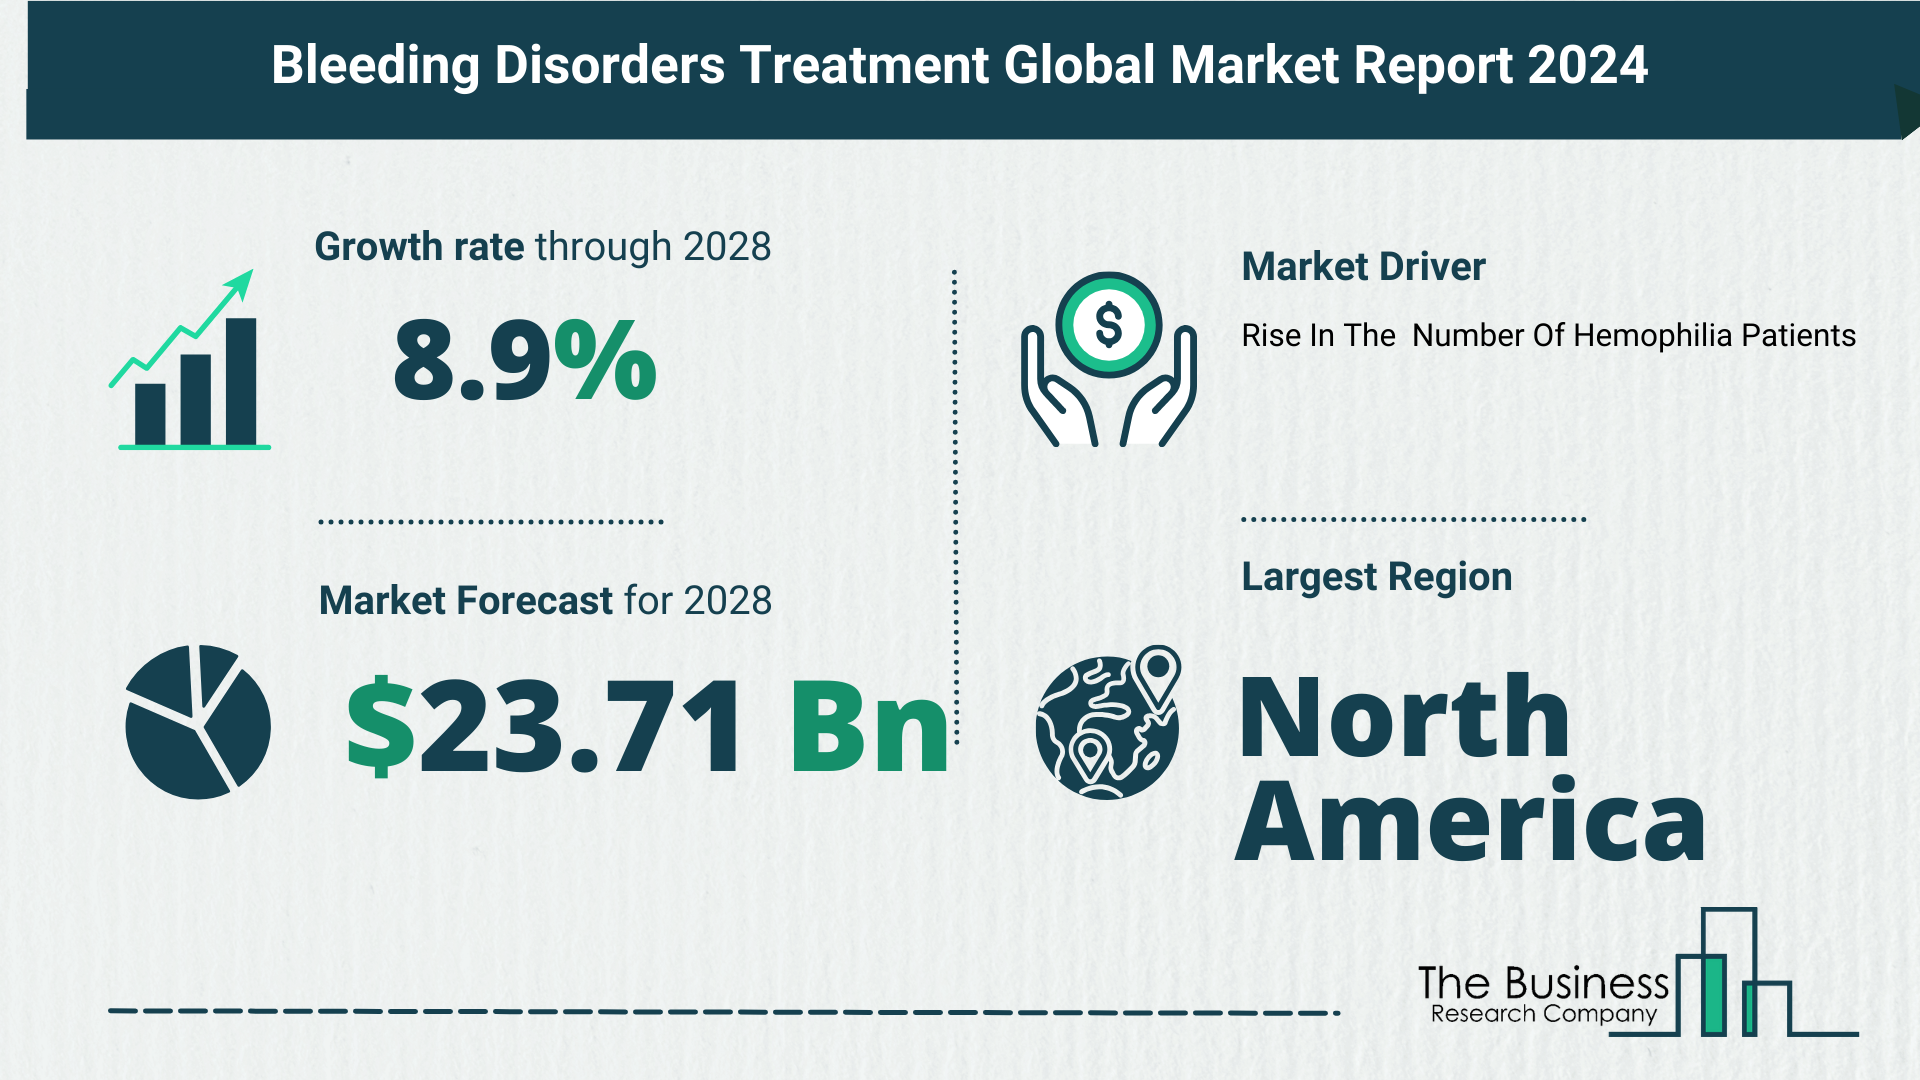 Global Bleeding Disorders Treatment Market Analysis 2024: Size, Share, And Key Trends